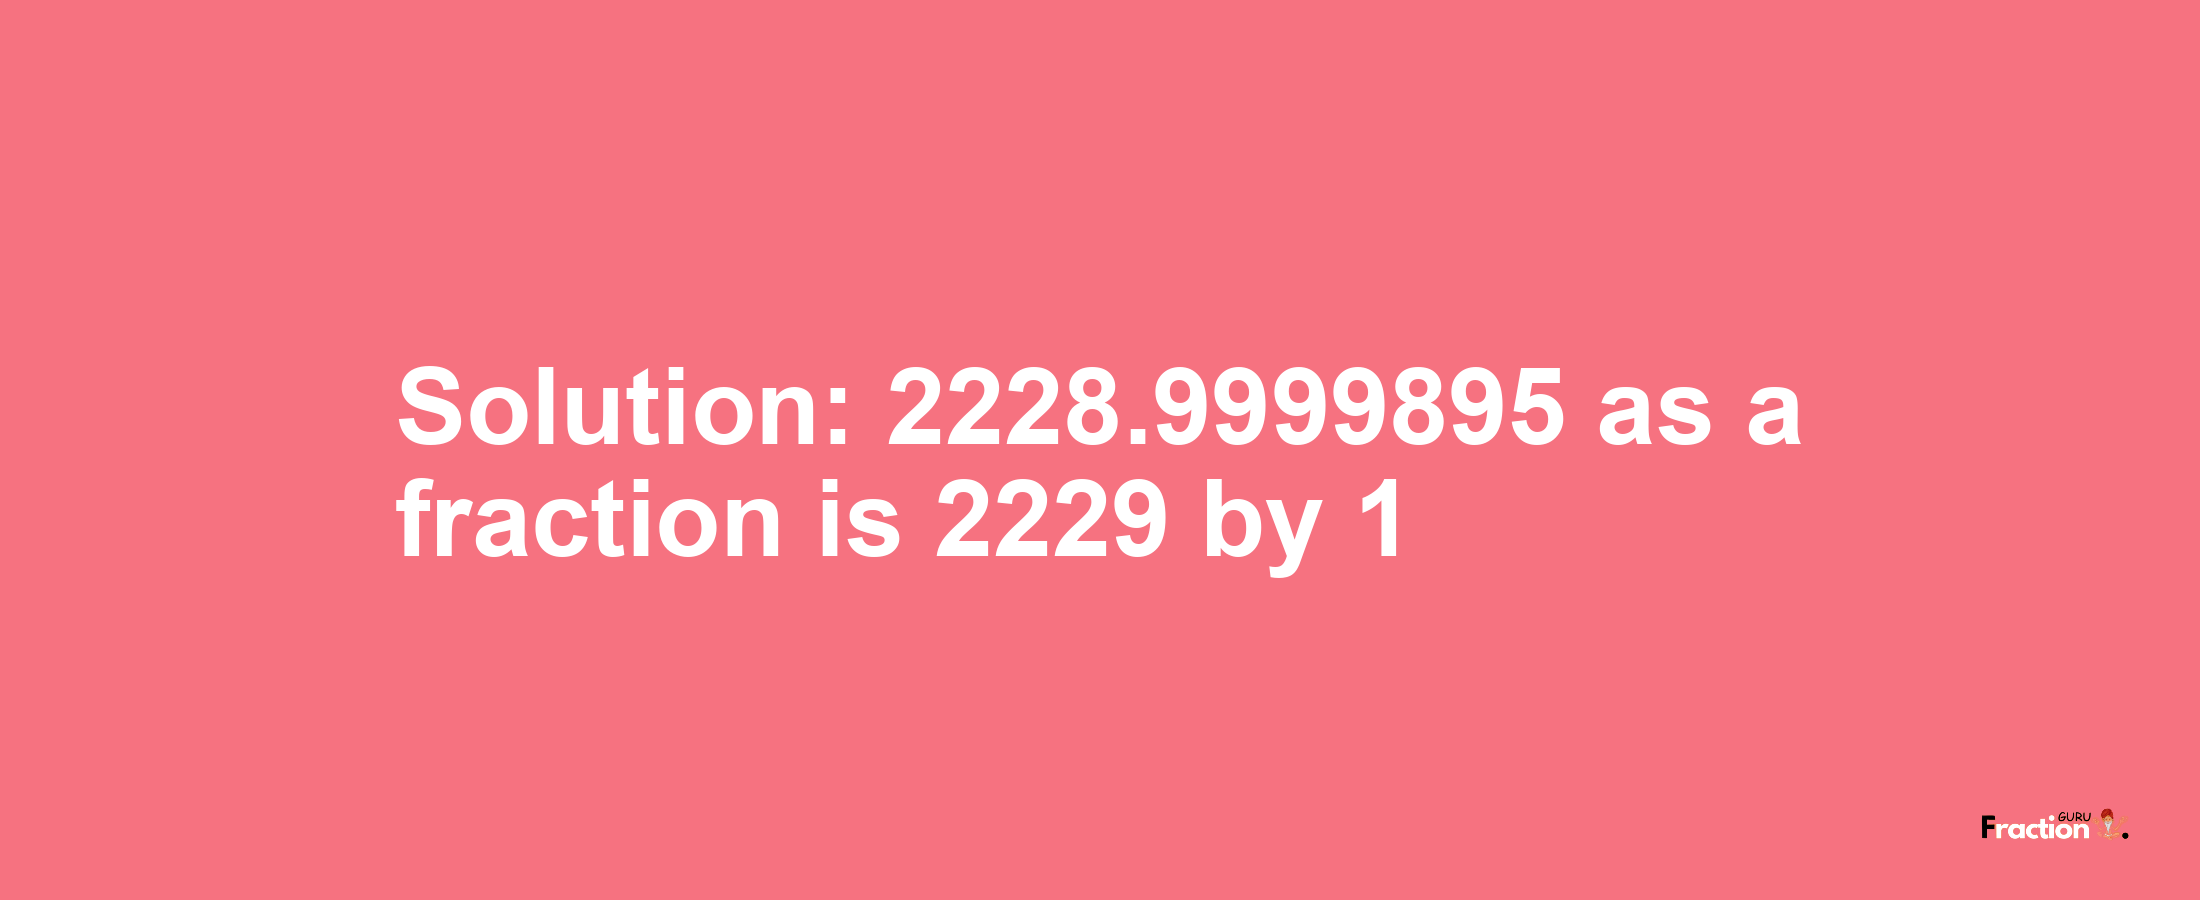 Solution:2228.9999895 as a fraction is 2229/1